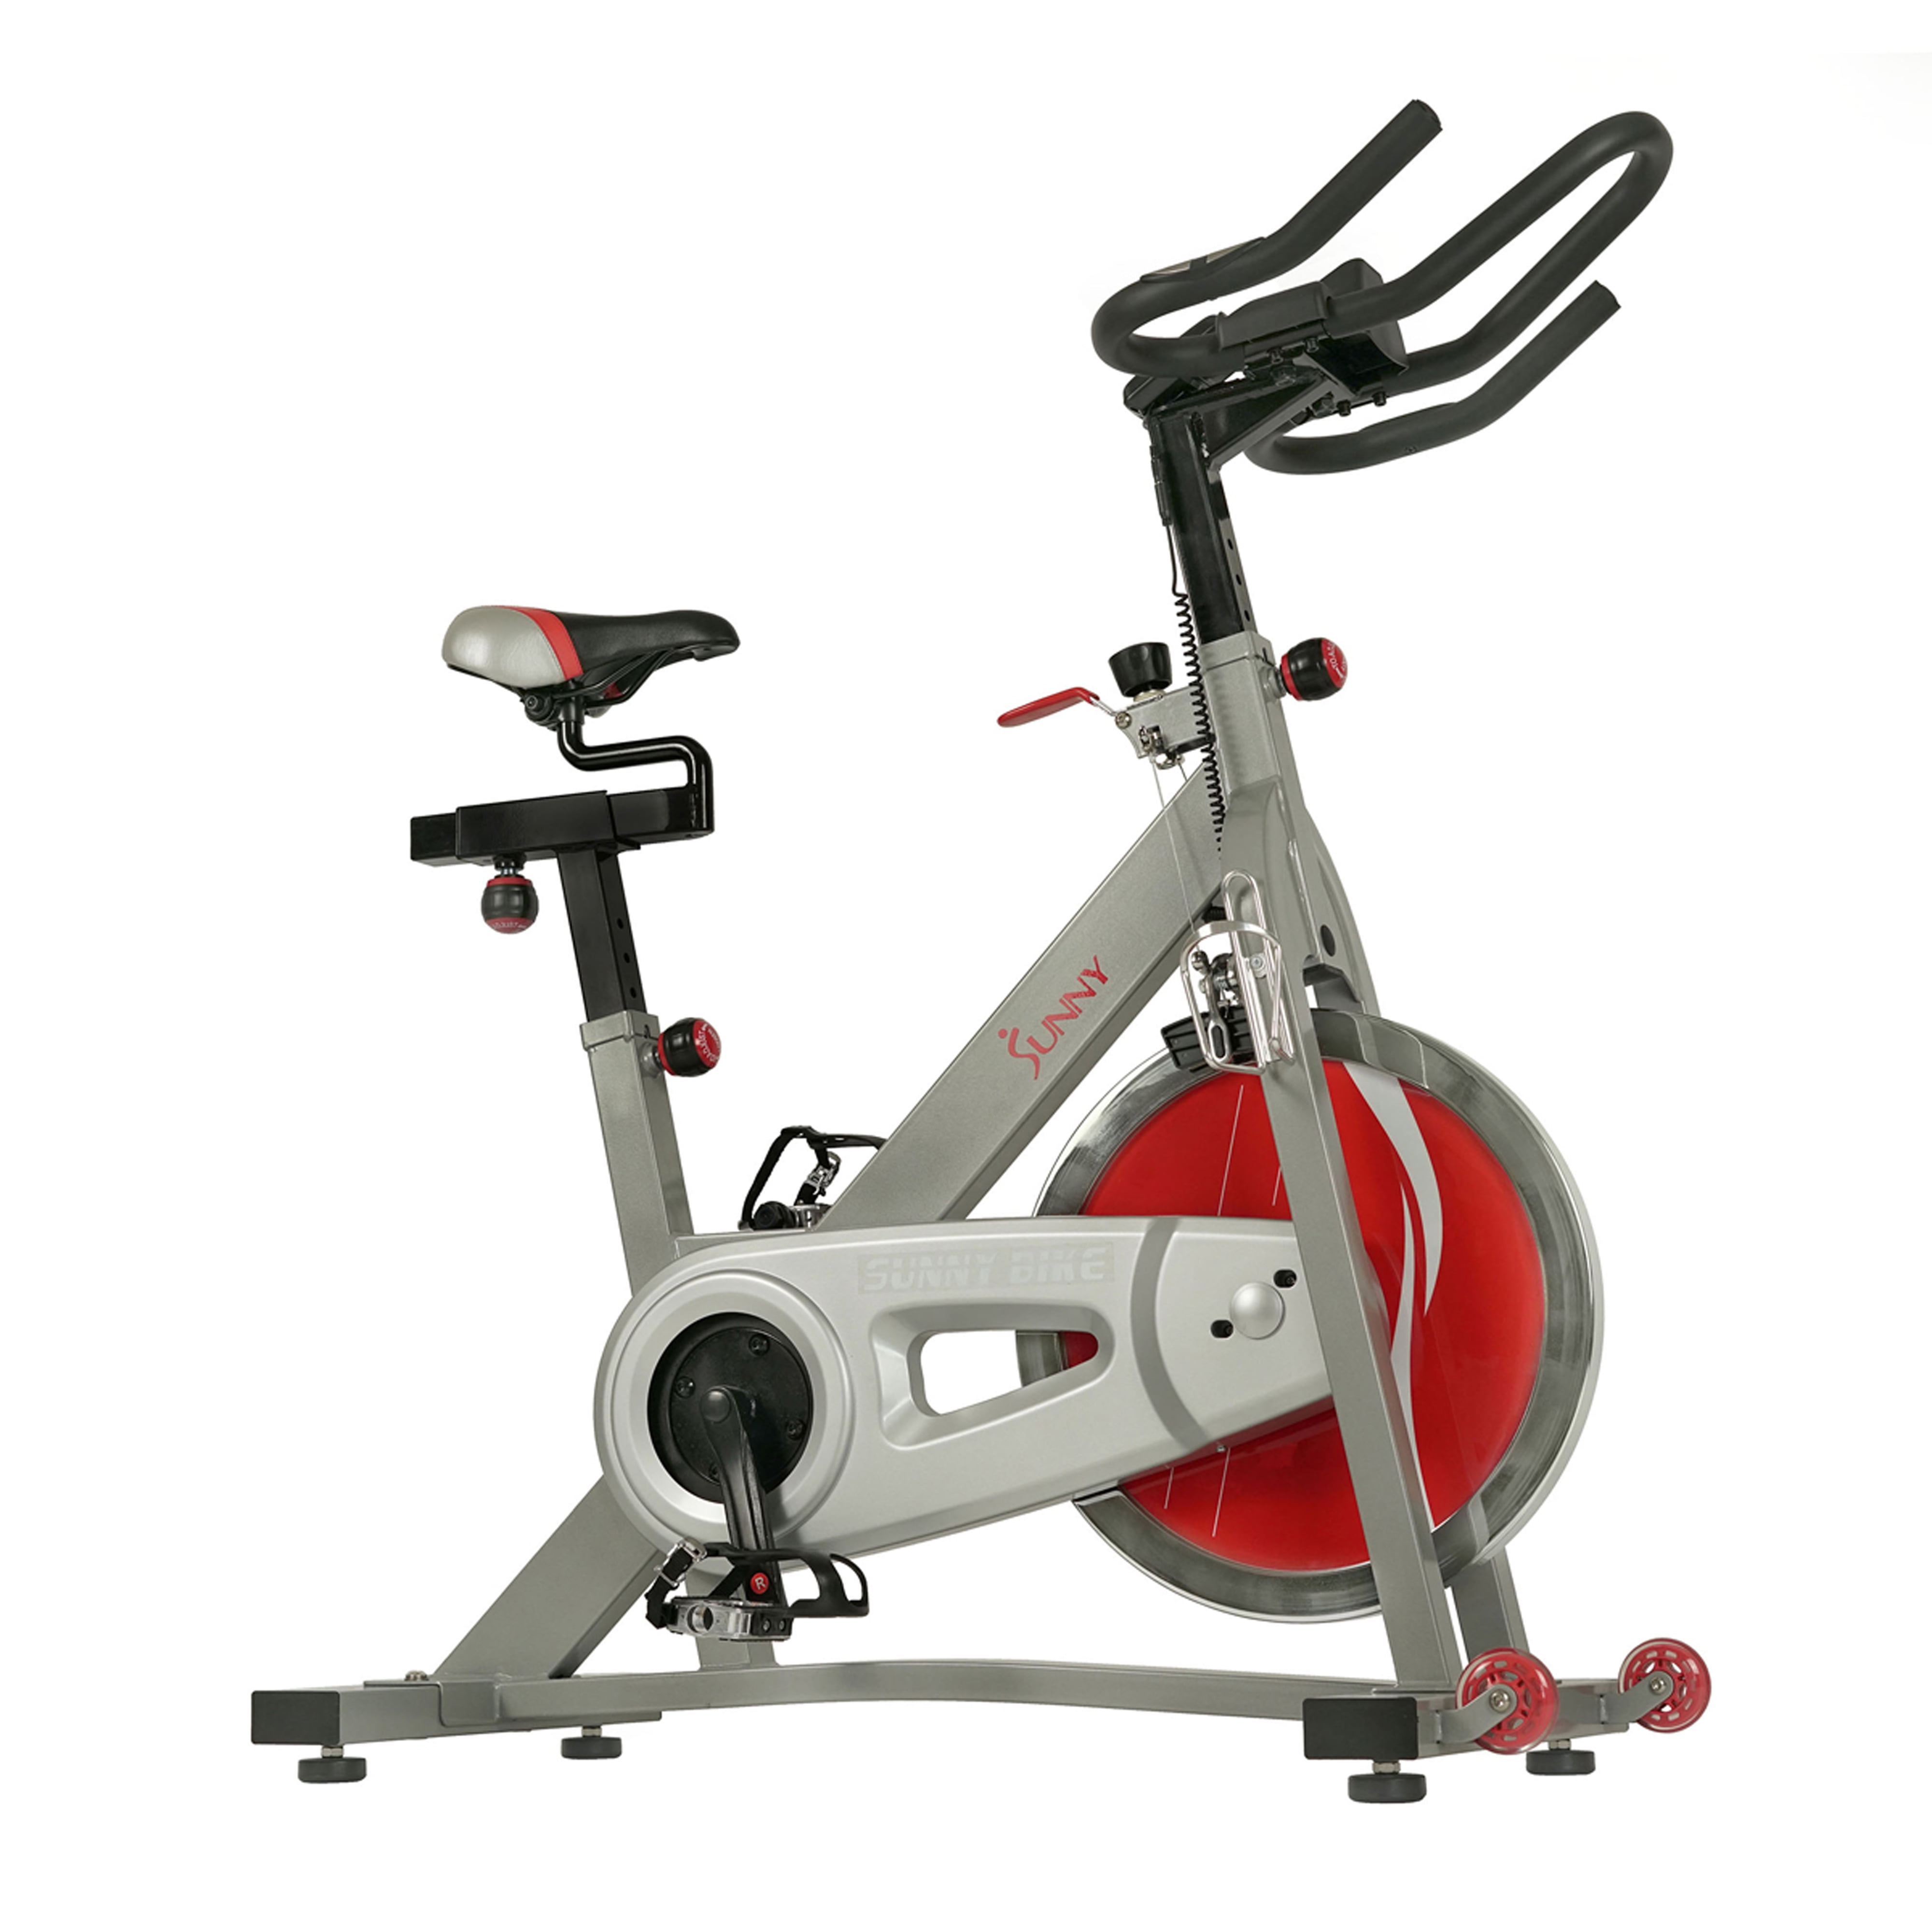 Pro Indoor Exercise Spinning Bike Stationary Bicycle Fitness Cardio Home Cycling 